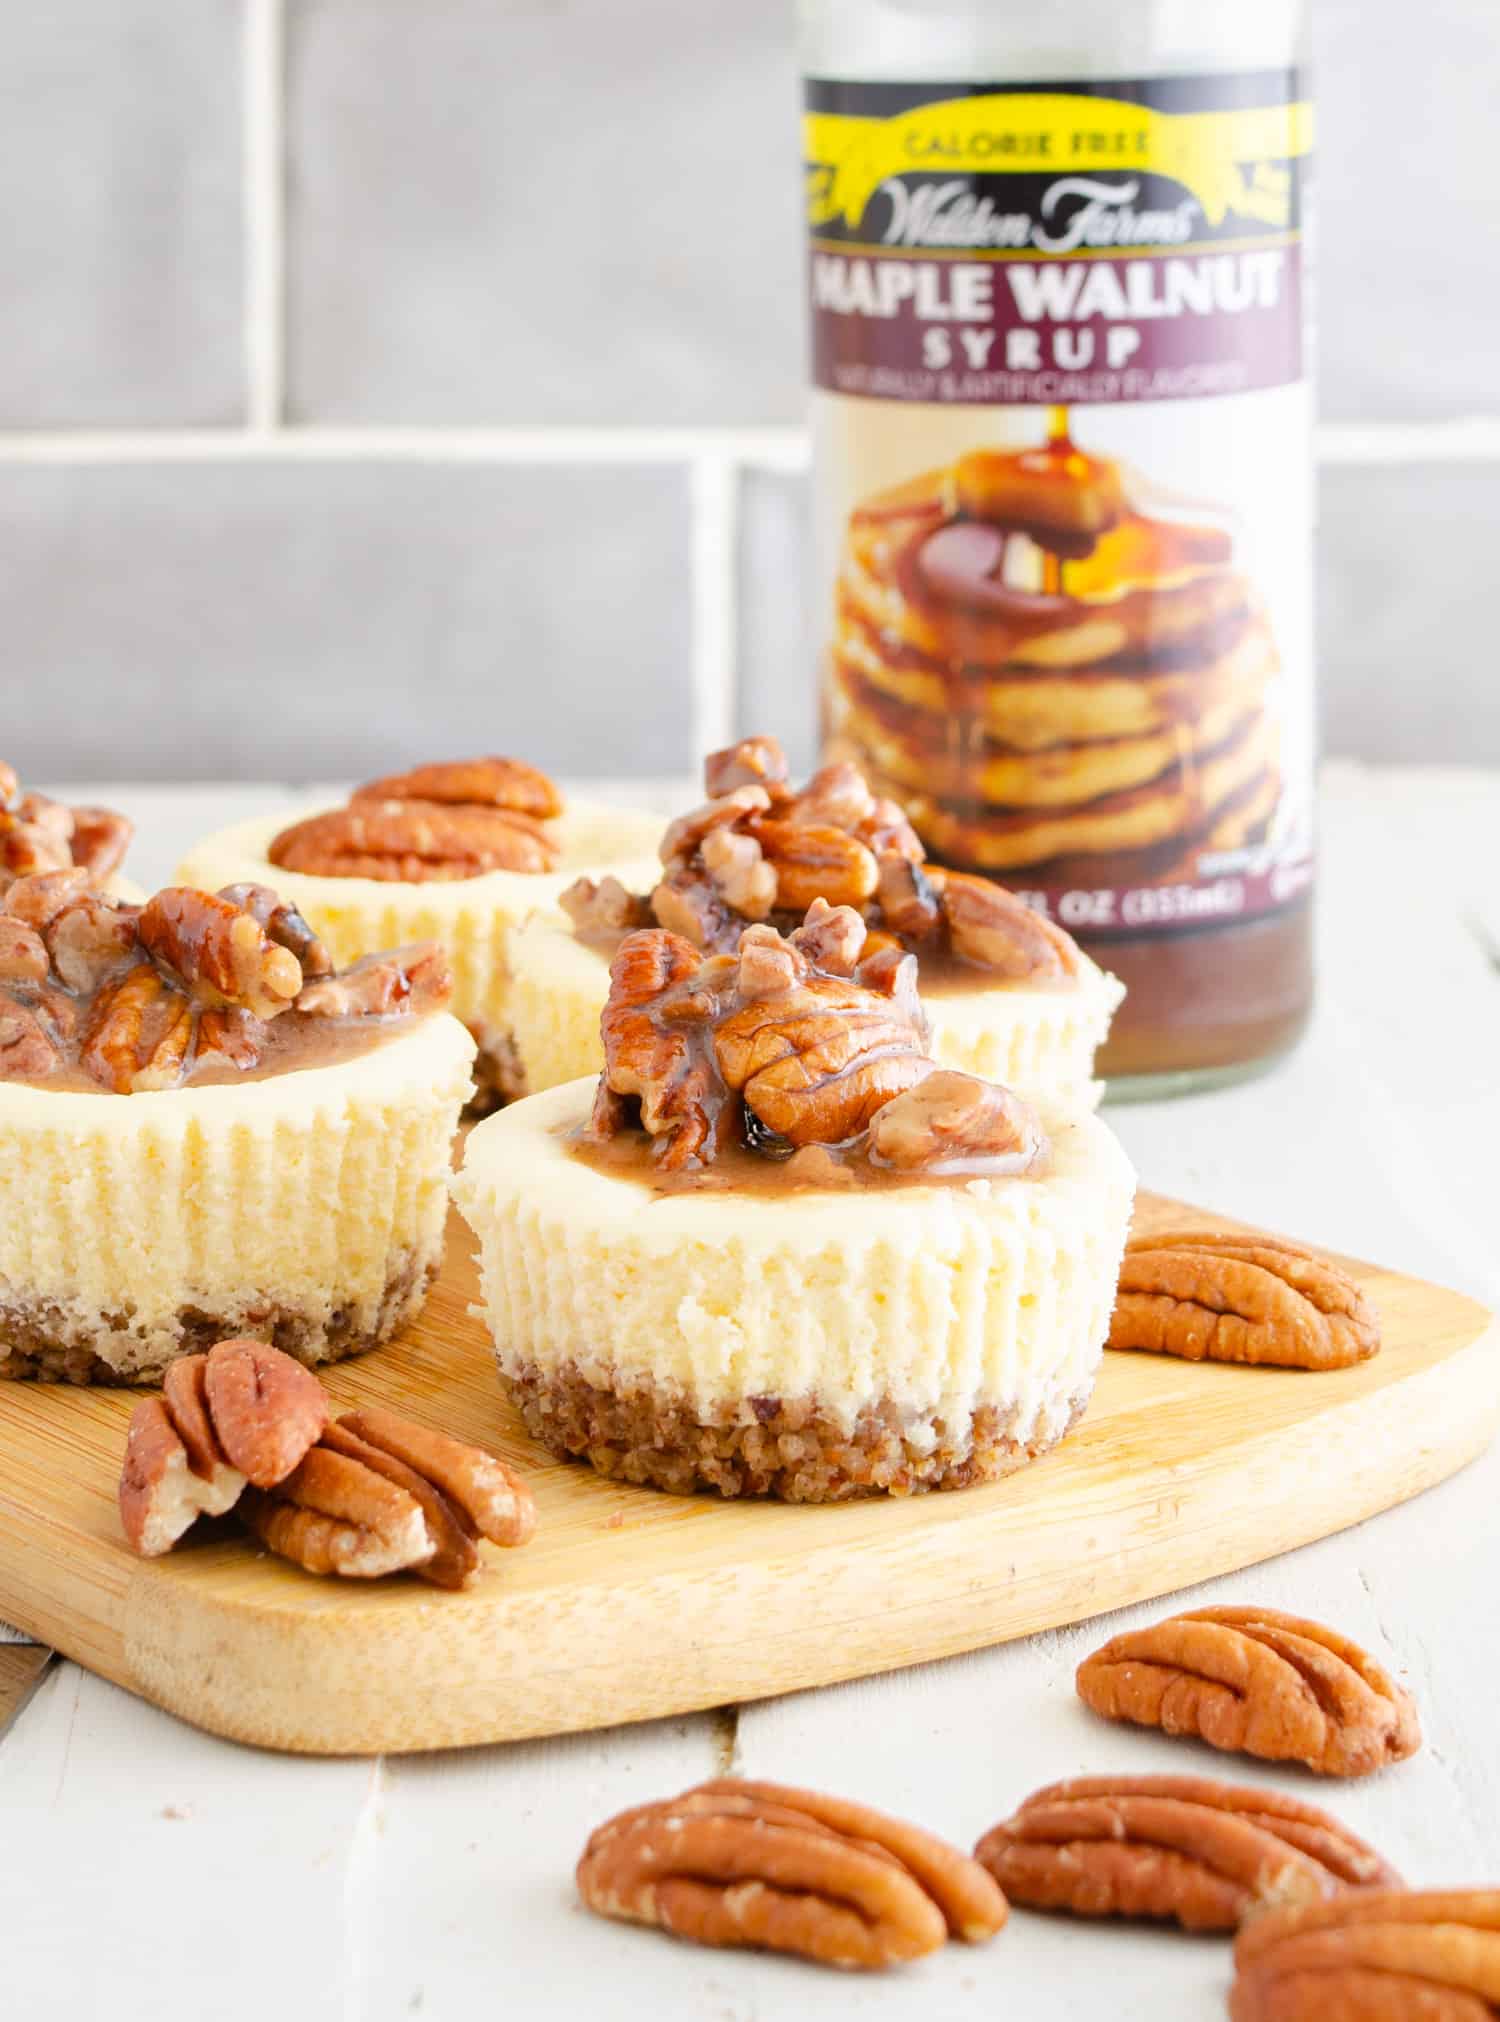 Mini keto cheesecakes with a sugar free topping maple from Waldens syrup and pecans. A bottle of Waldens in the background.